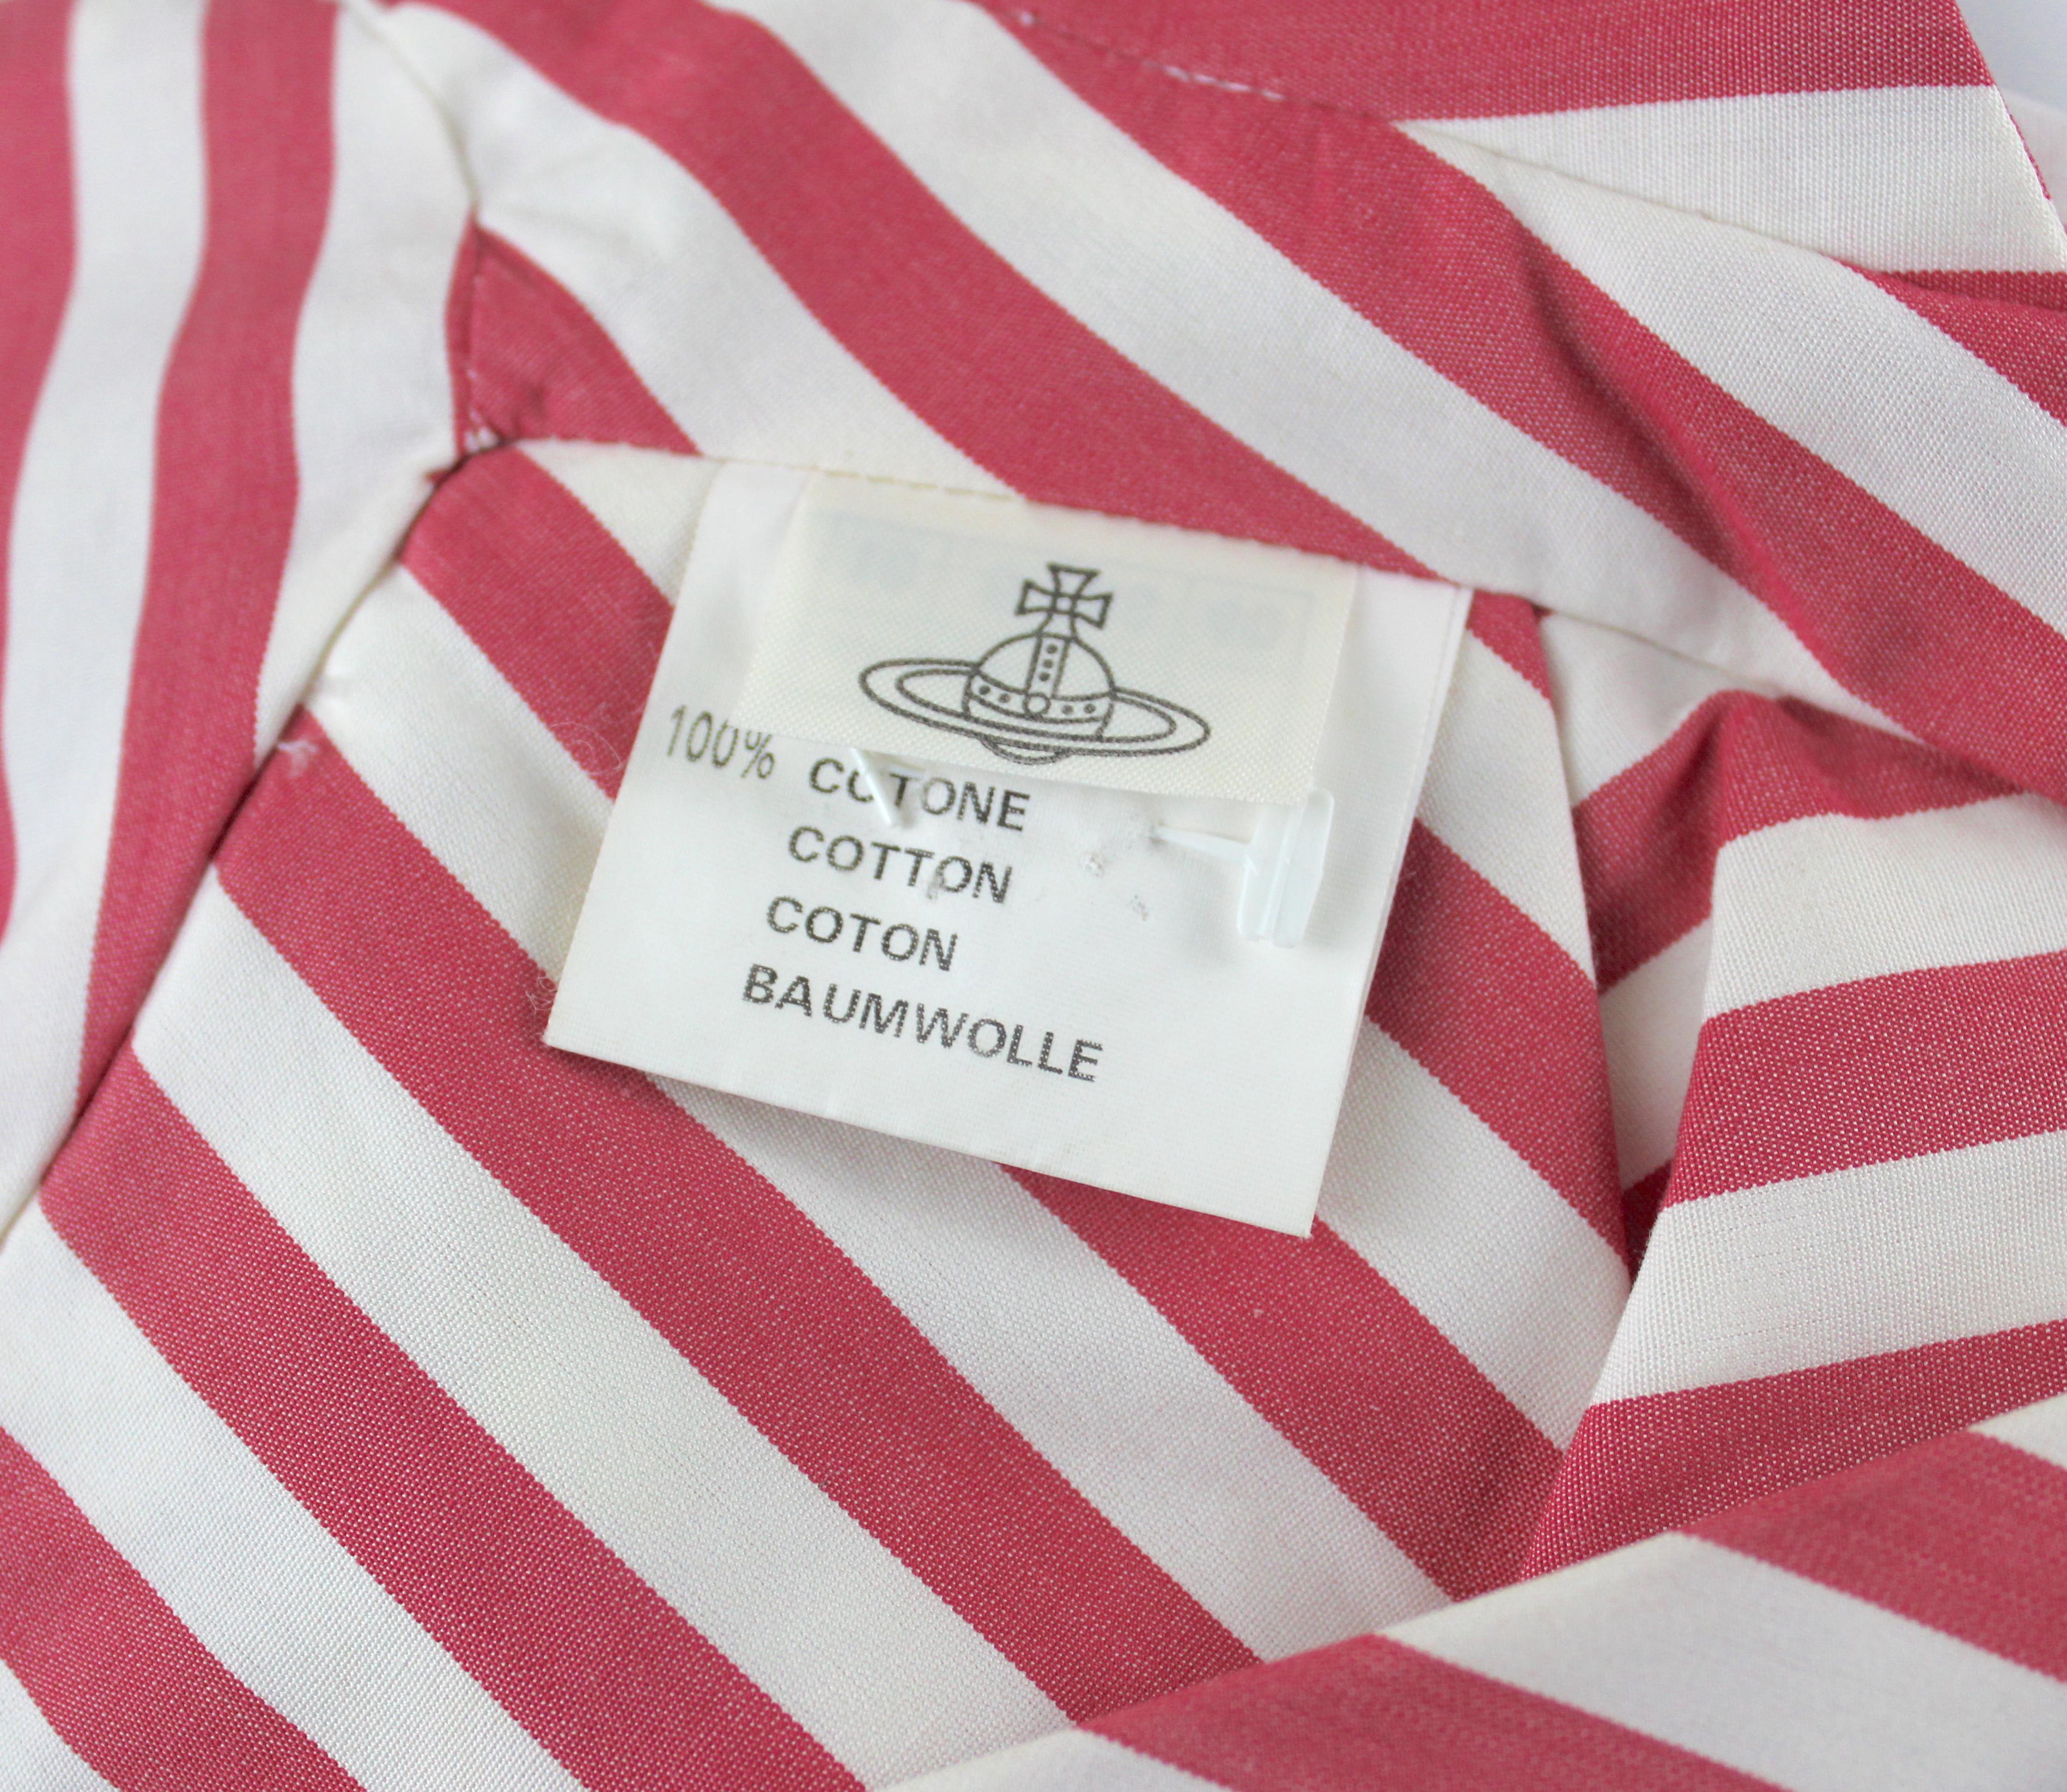 Vivienne Westwood Candy Stripe Halter top, c. 90's, Size 4 US In Excellent Condition For Sale In Los Angeles, CA